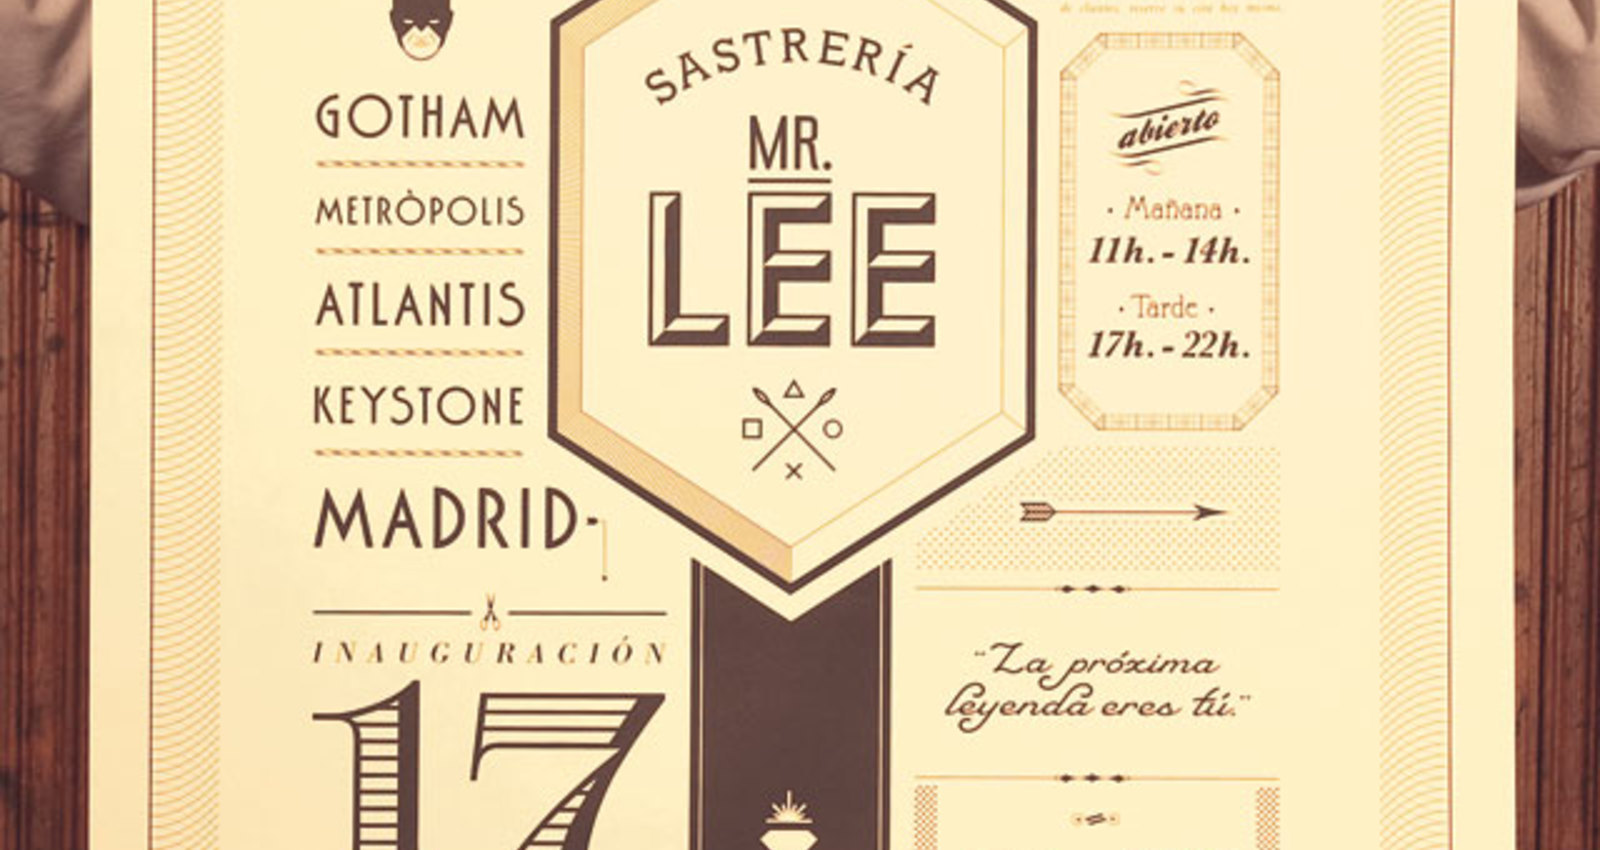 Mr. Lee, tailor to superheroes and villains